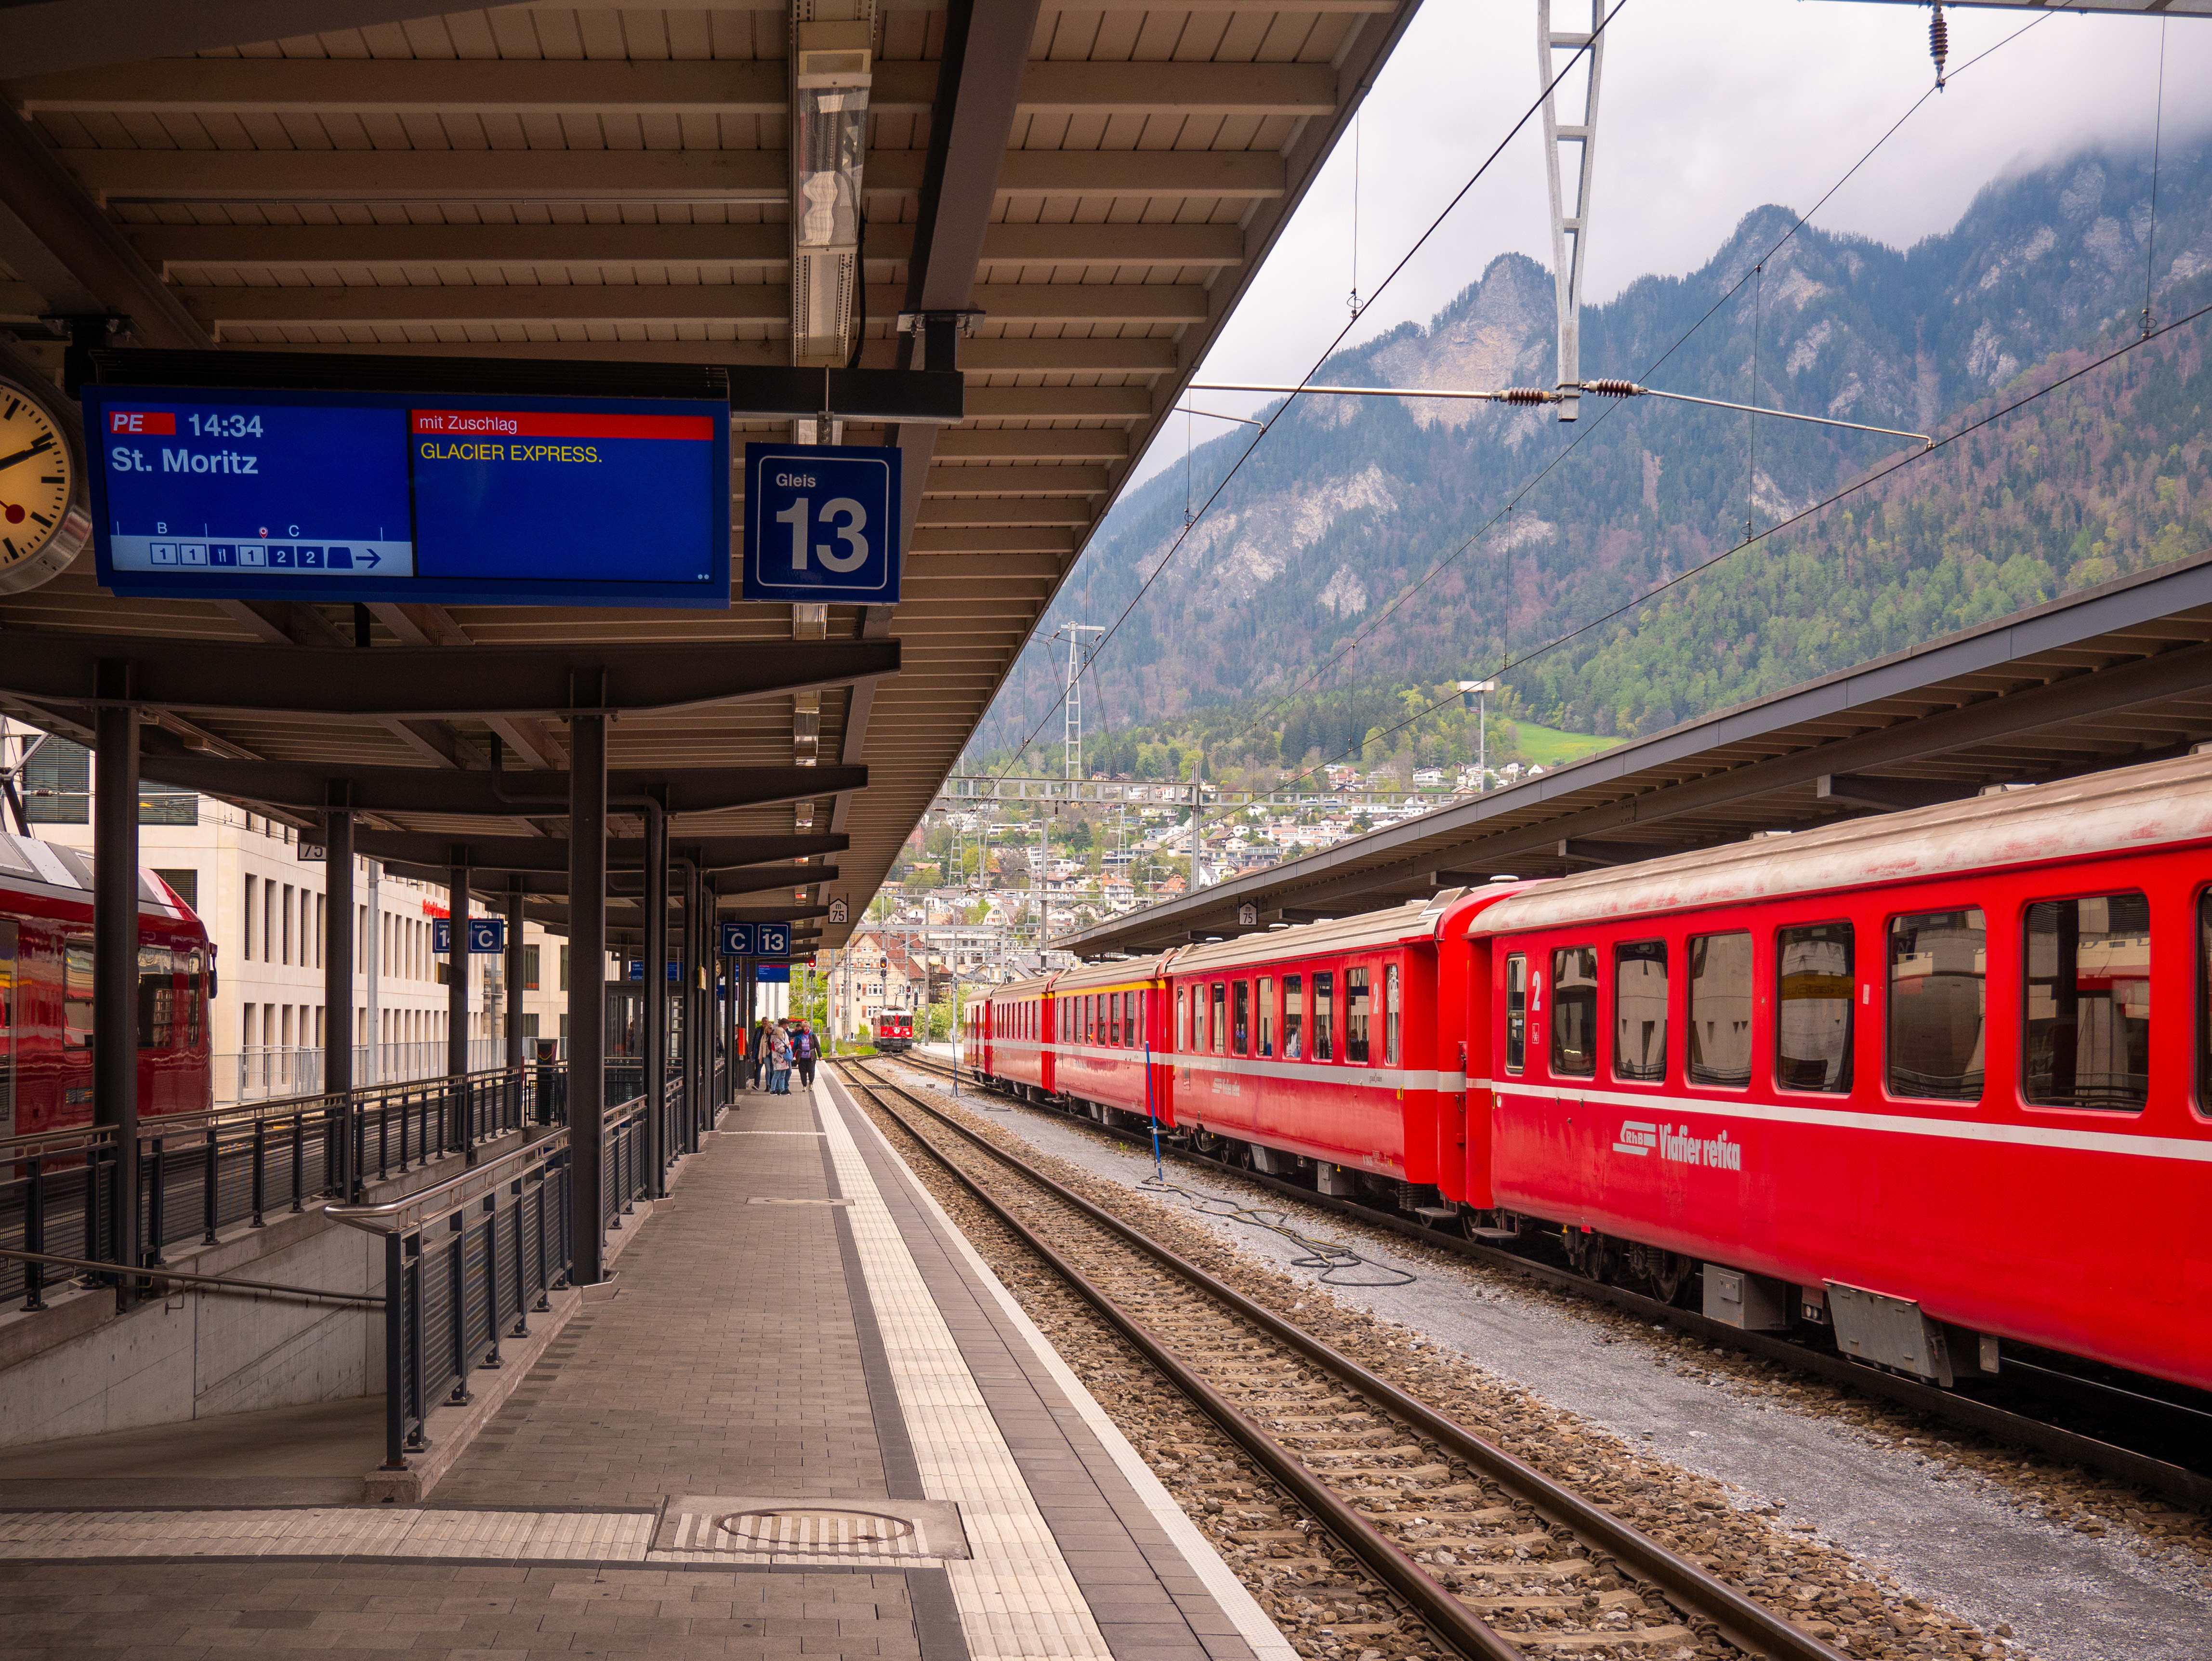 Train stopped at a train station in Switzerland